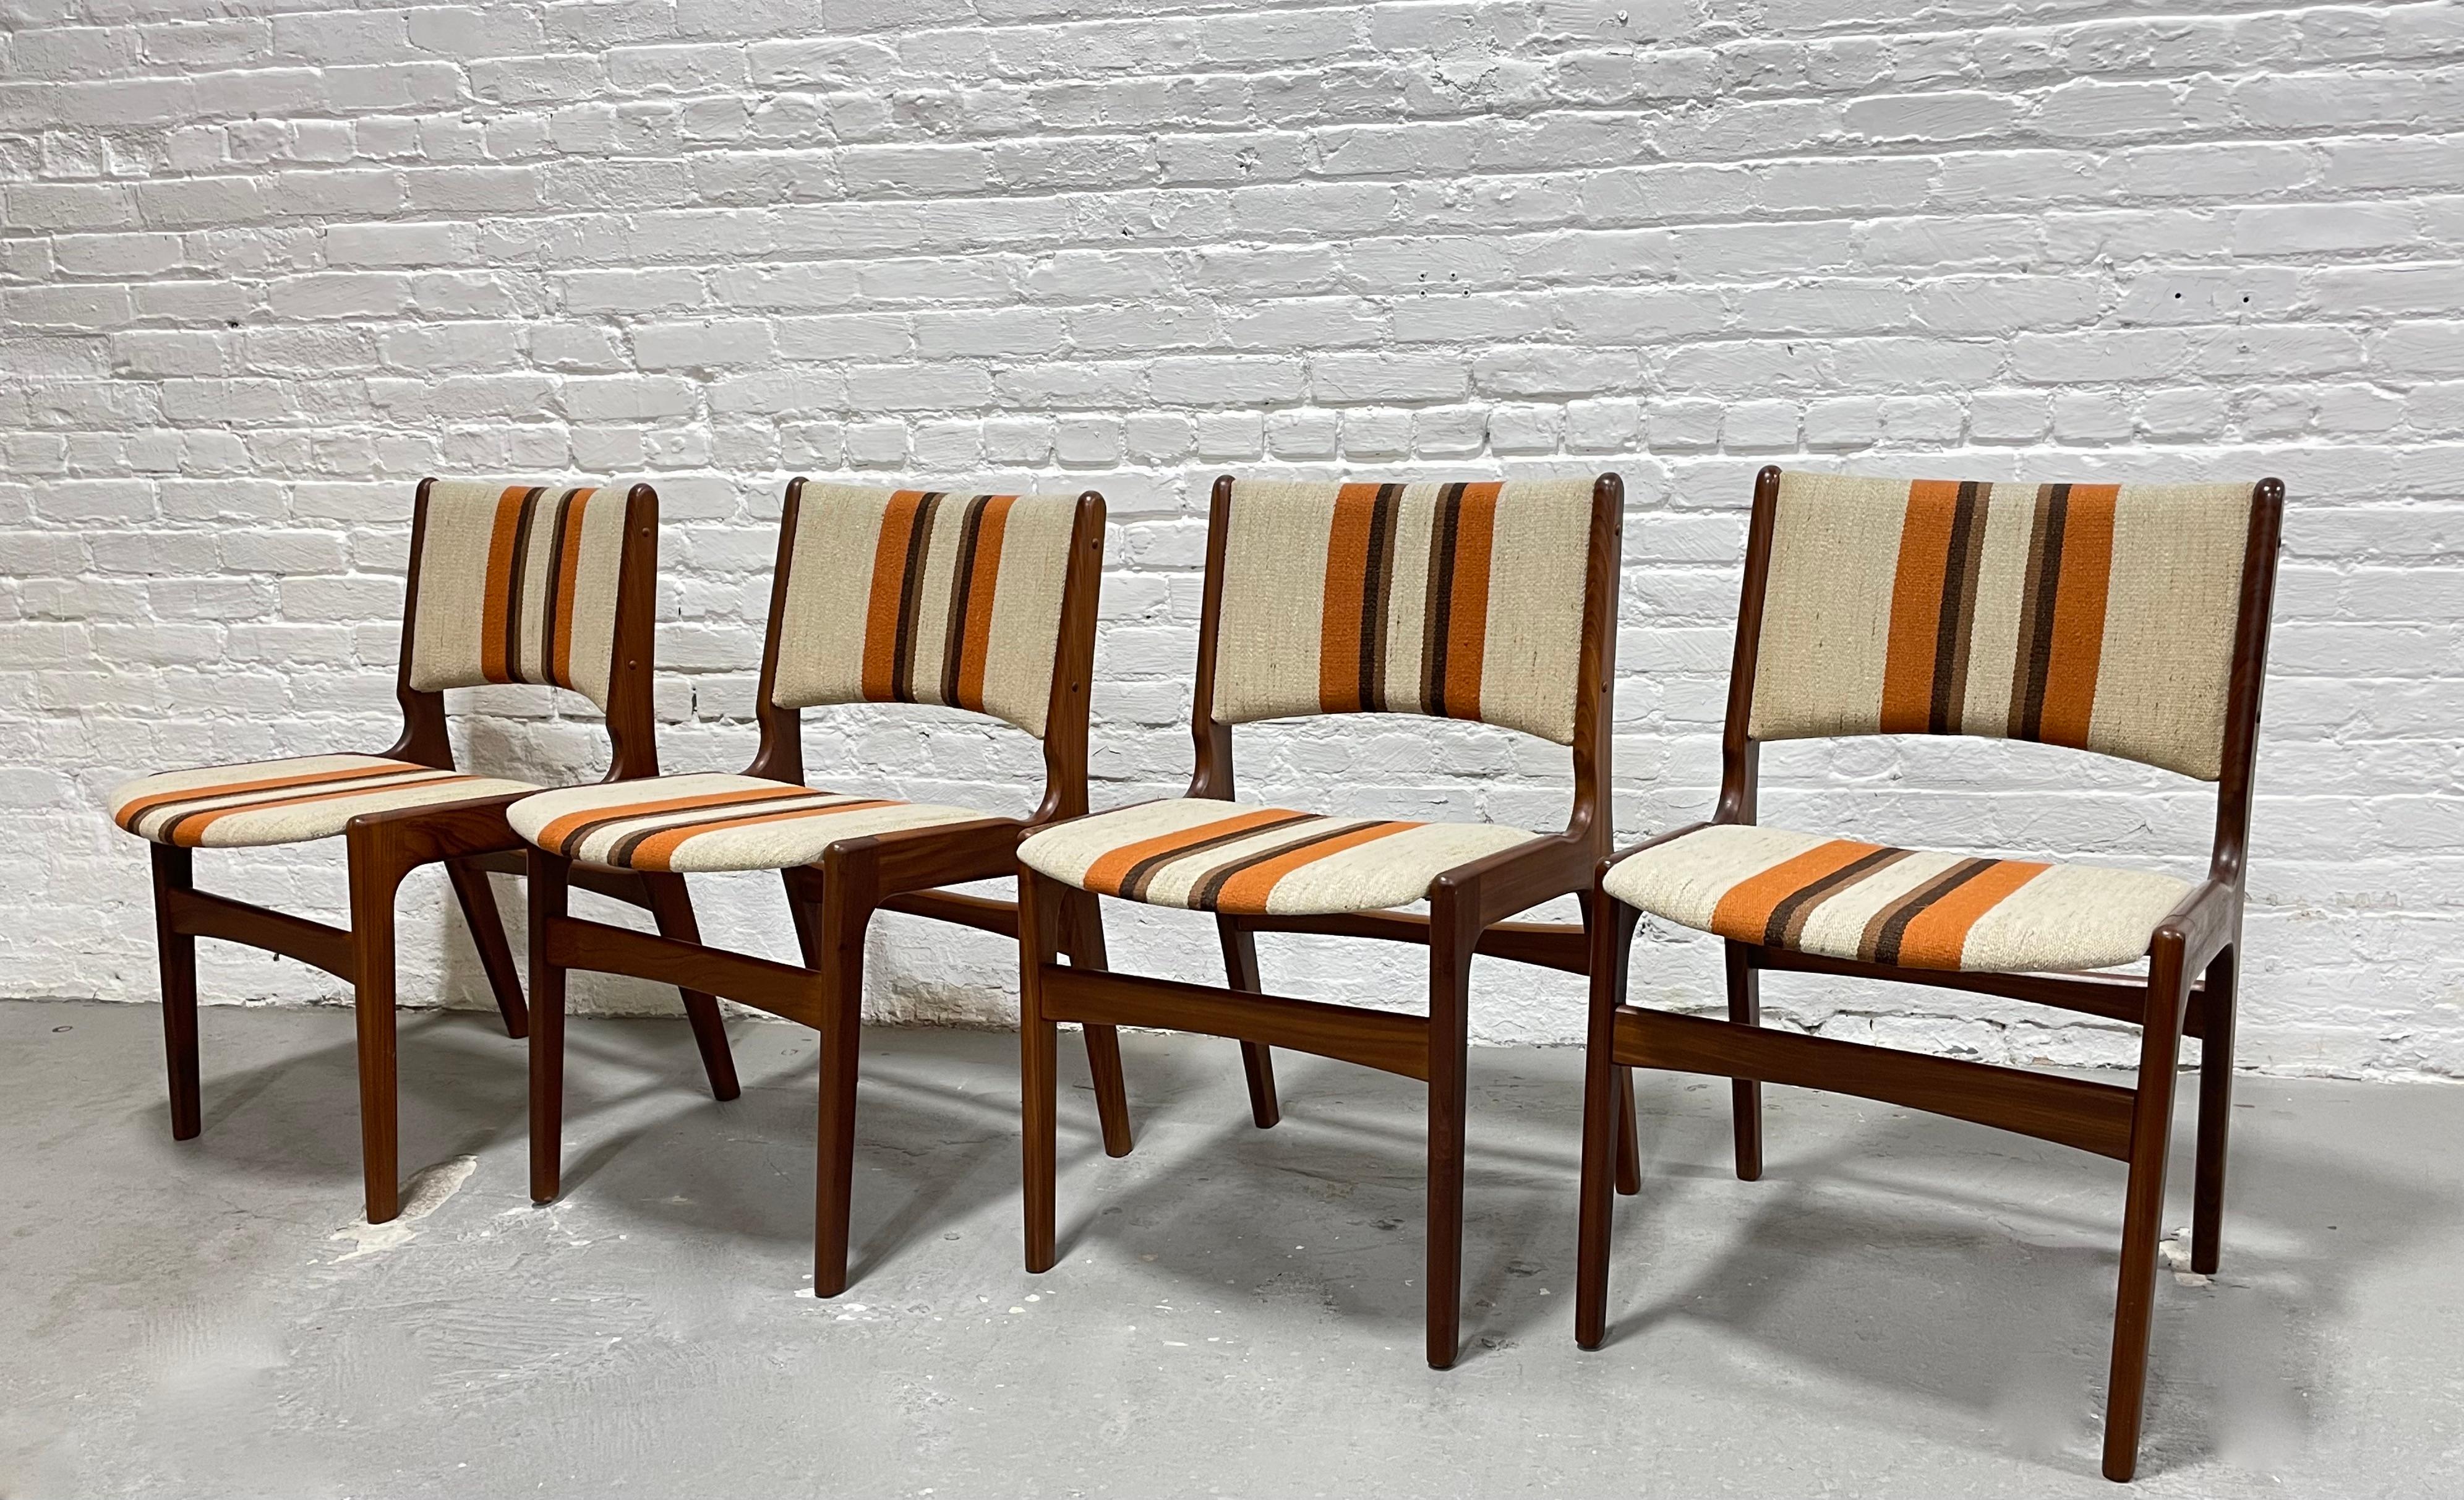 Incredible Set of Four Mid Century Modern Teak Danish Chairs by Erik Buch. This set boasts gorgeous wood grains along the teak frames and ultra comfortable support and seating. The upholstery is superb in design and condition with plush seating and